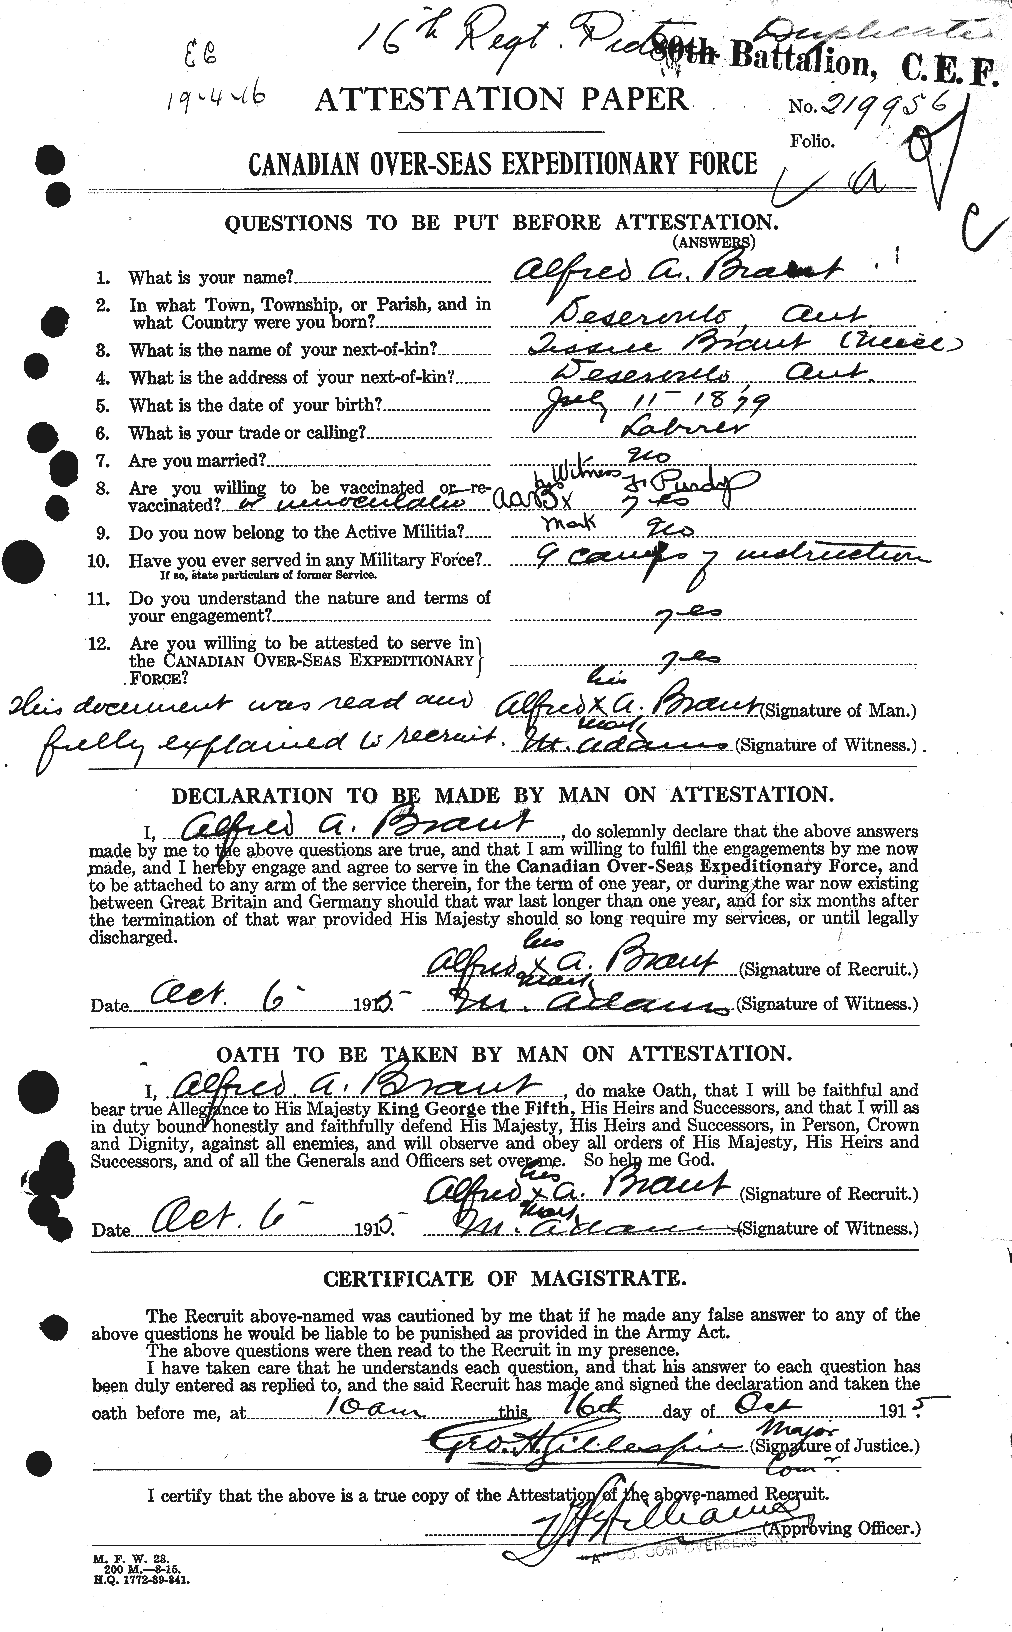 Personnel Records of the First World War - CEF 257834a